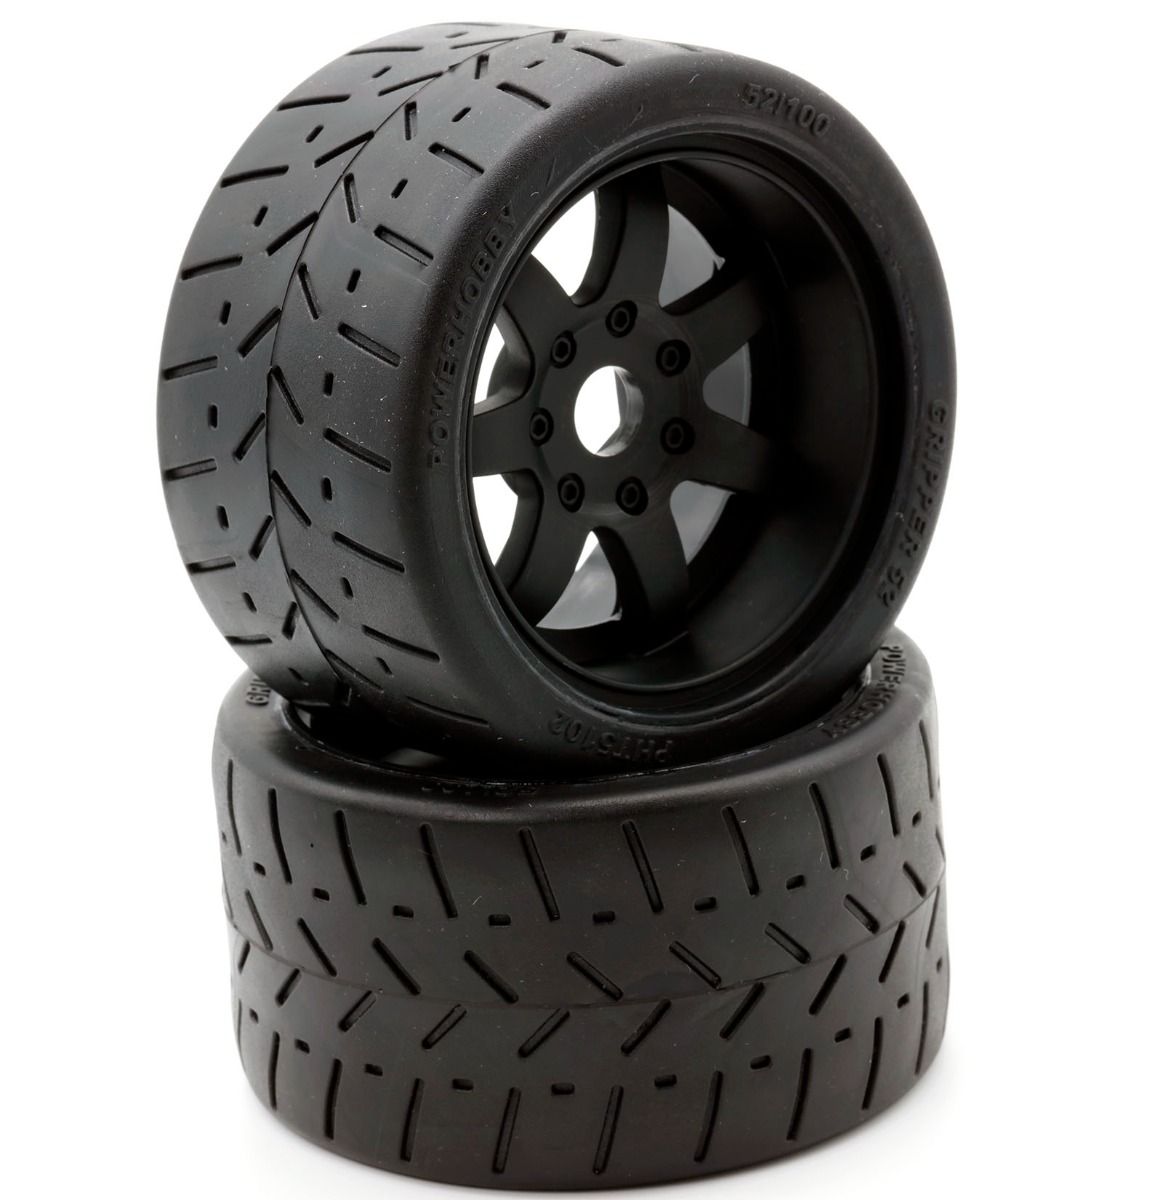 Powerhobby PHT5102 1/8 Gripper 54/100 Belted Mounted Tires 17mm Black Wheels